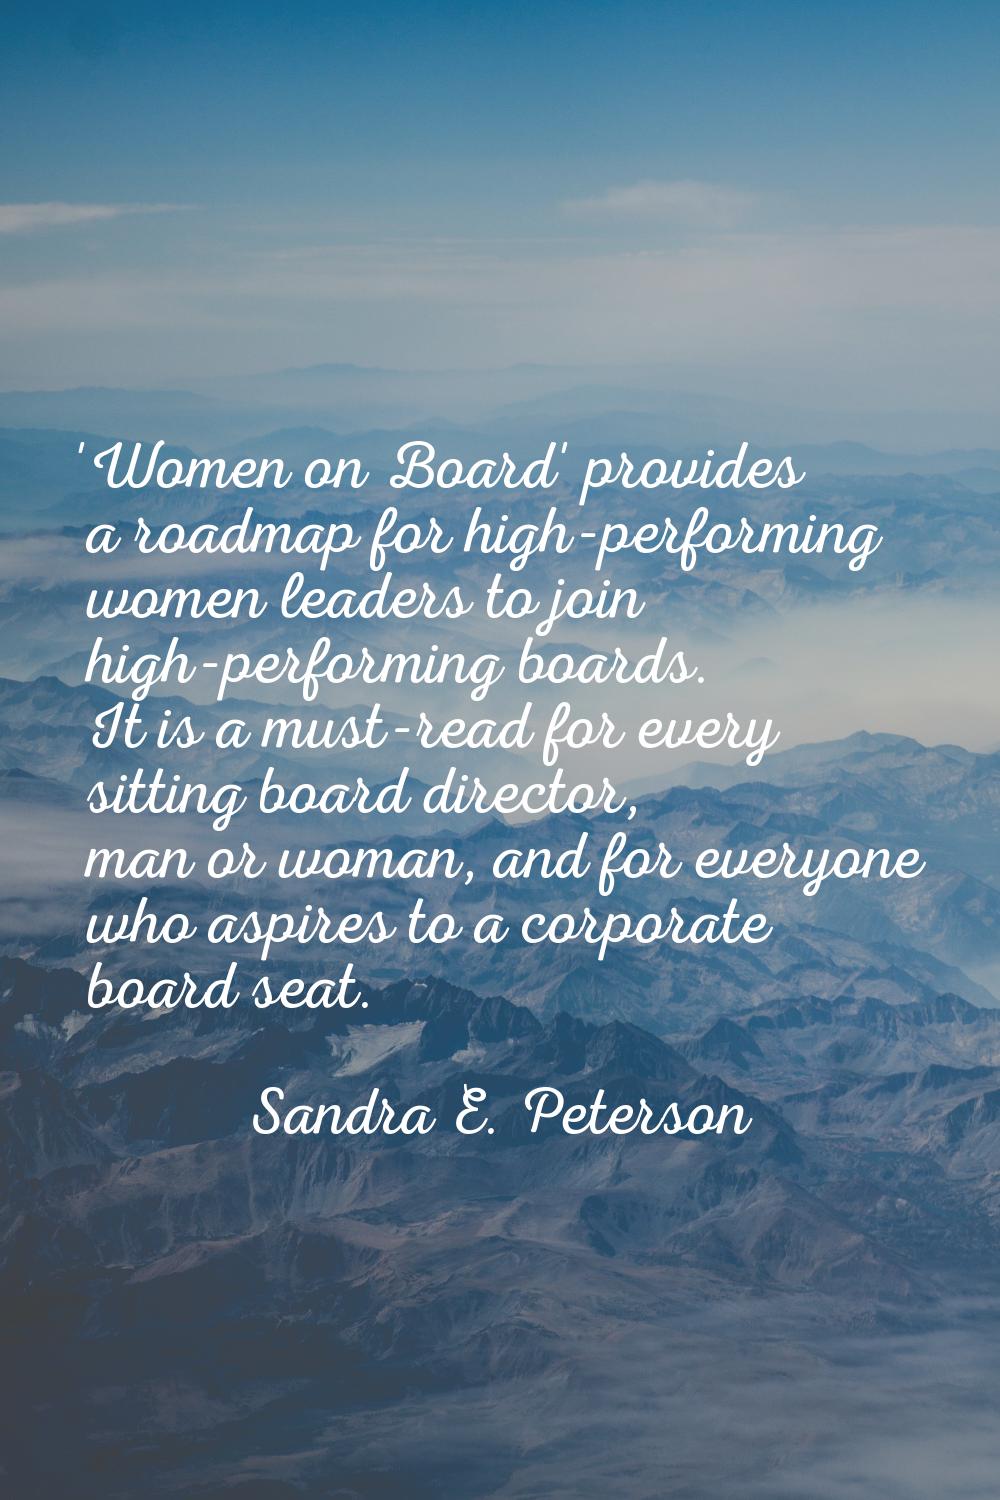 'Women on Board' provides a roadmap for high-performing women leaders to join high-performing board